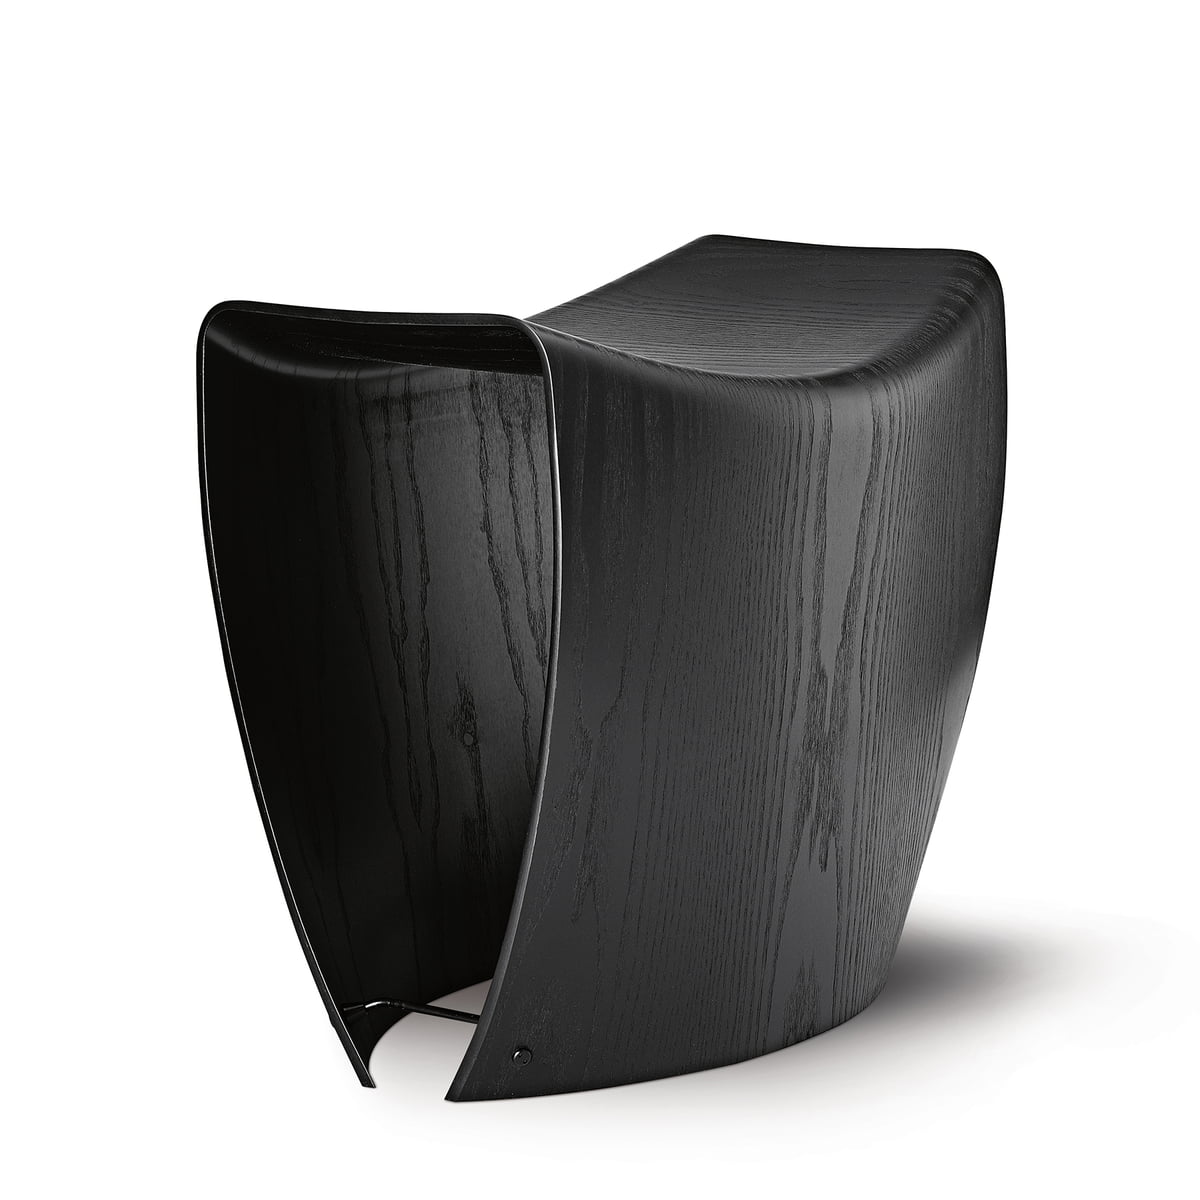 Fredericia Gallery Stool